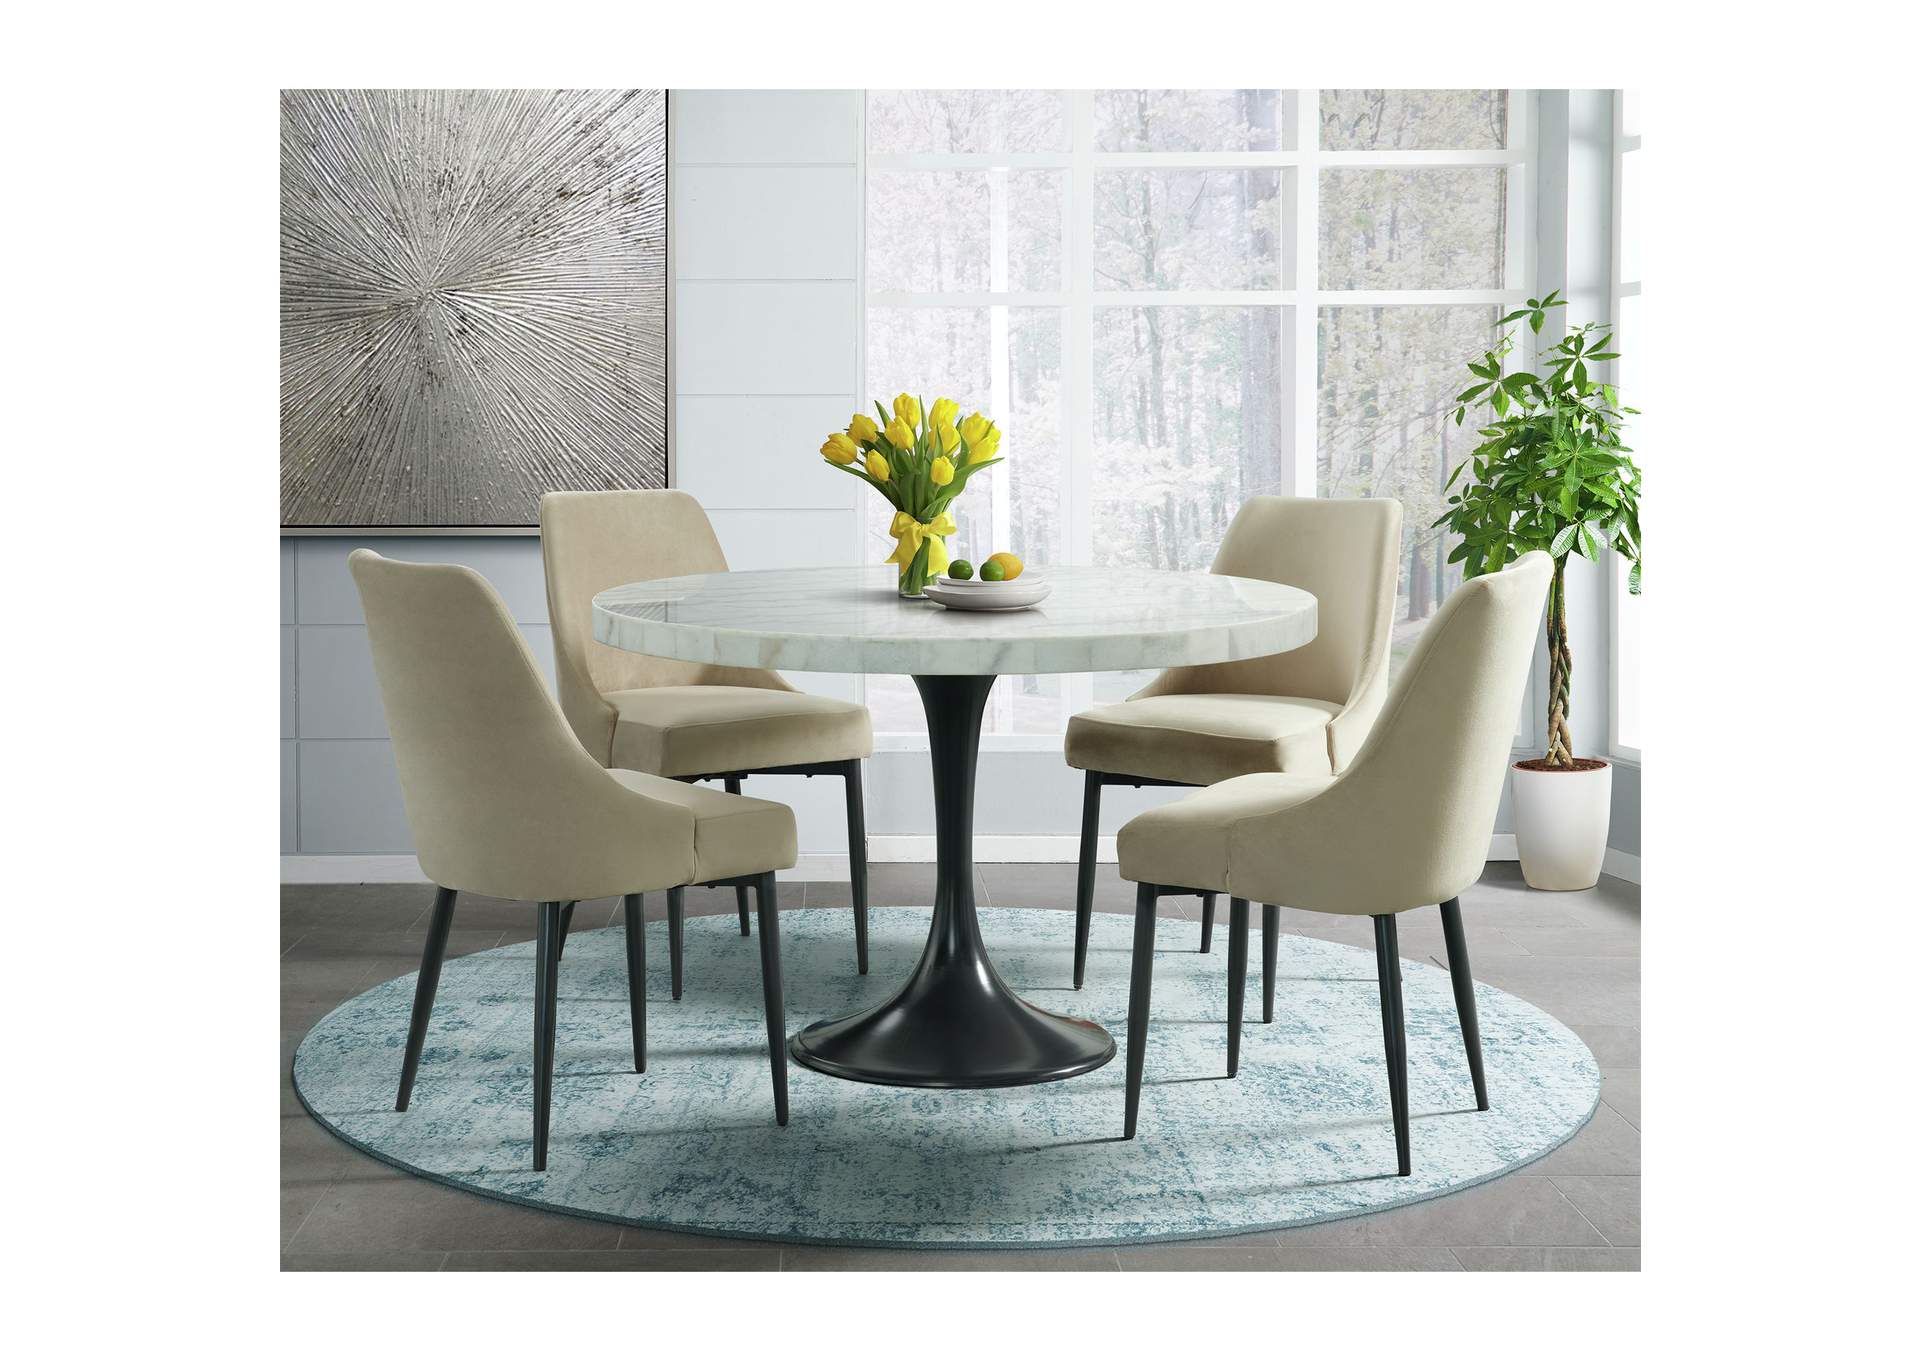 Celeste Dining Side Chair With Cream Fabric 2 Per Carton,Elements